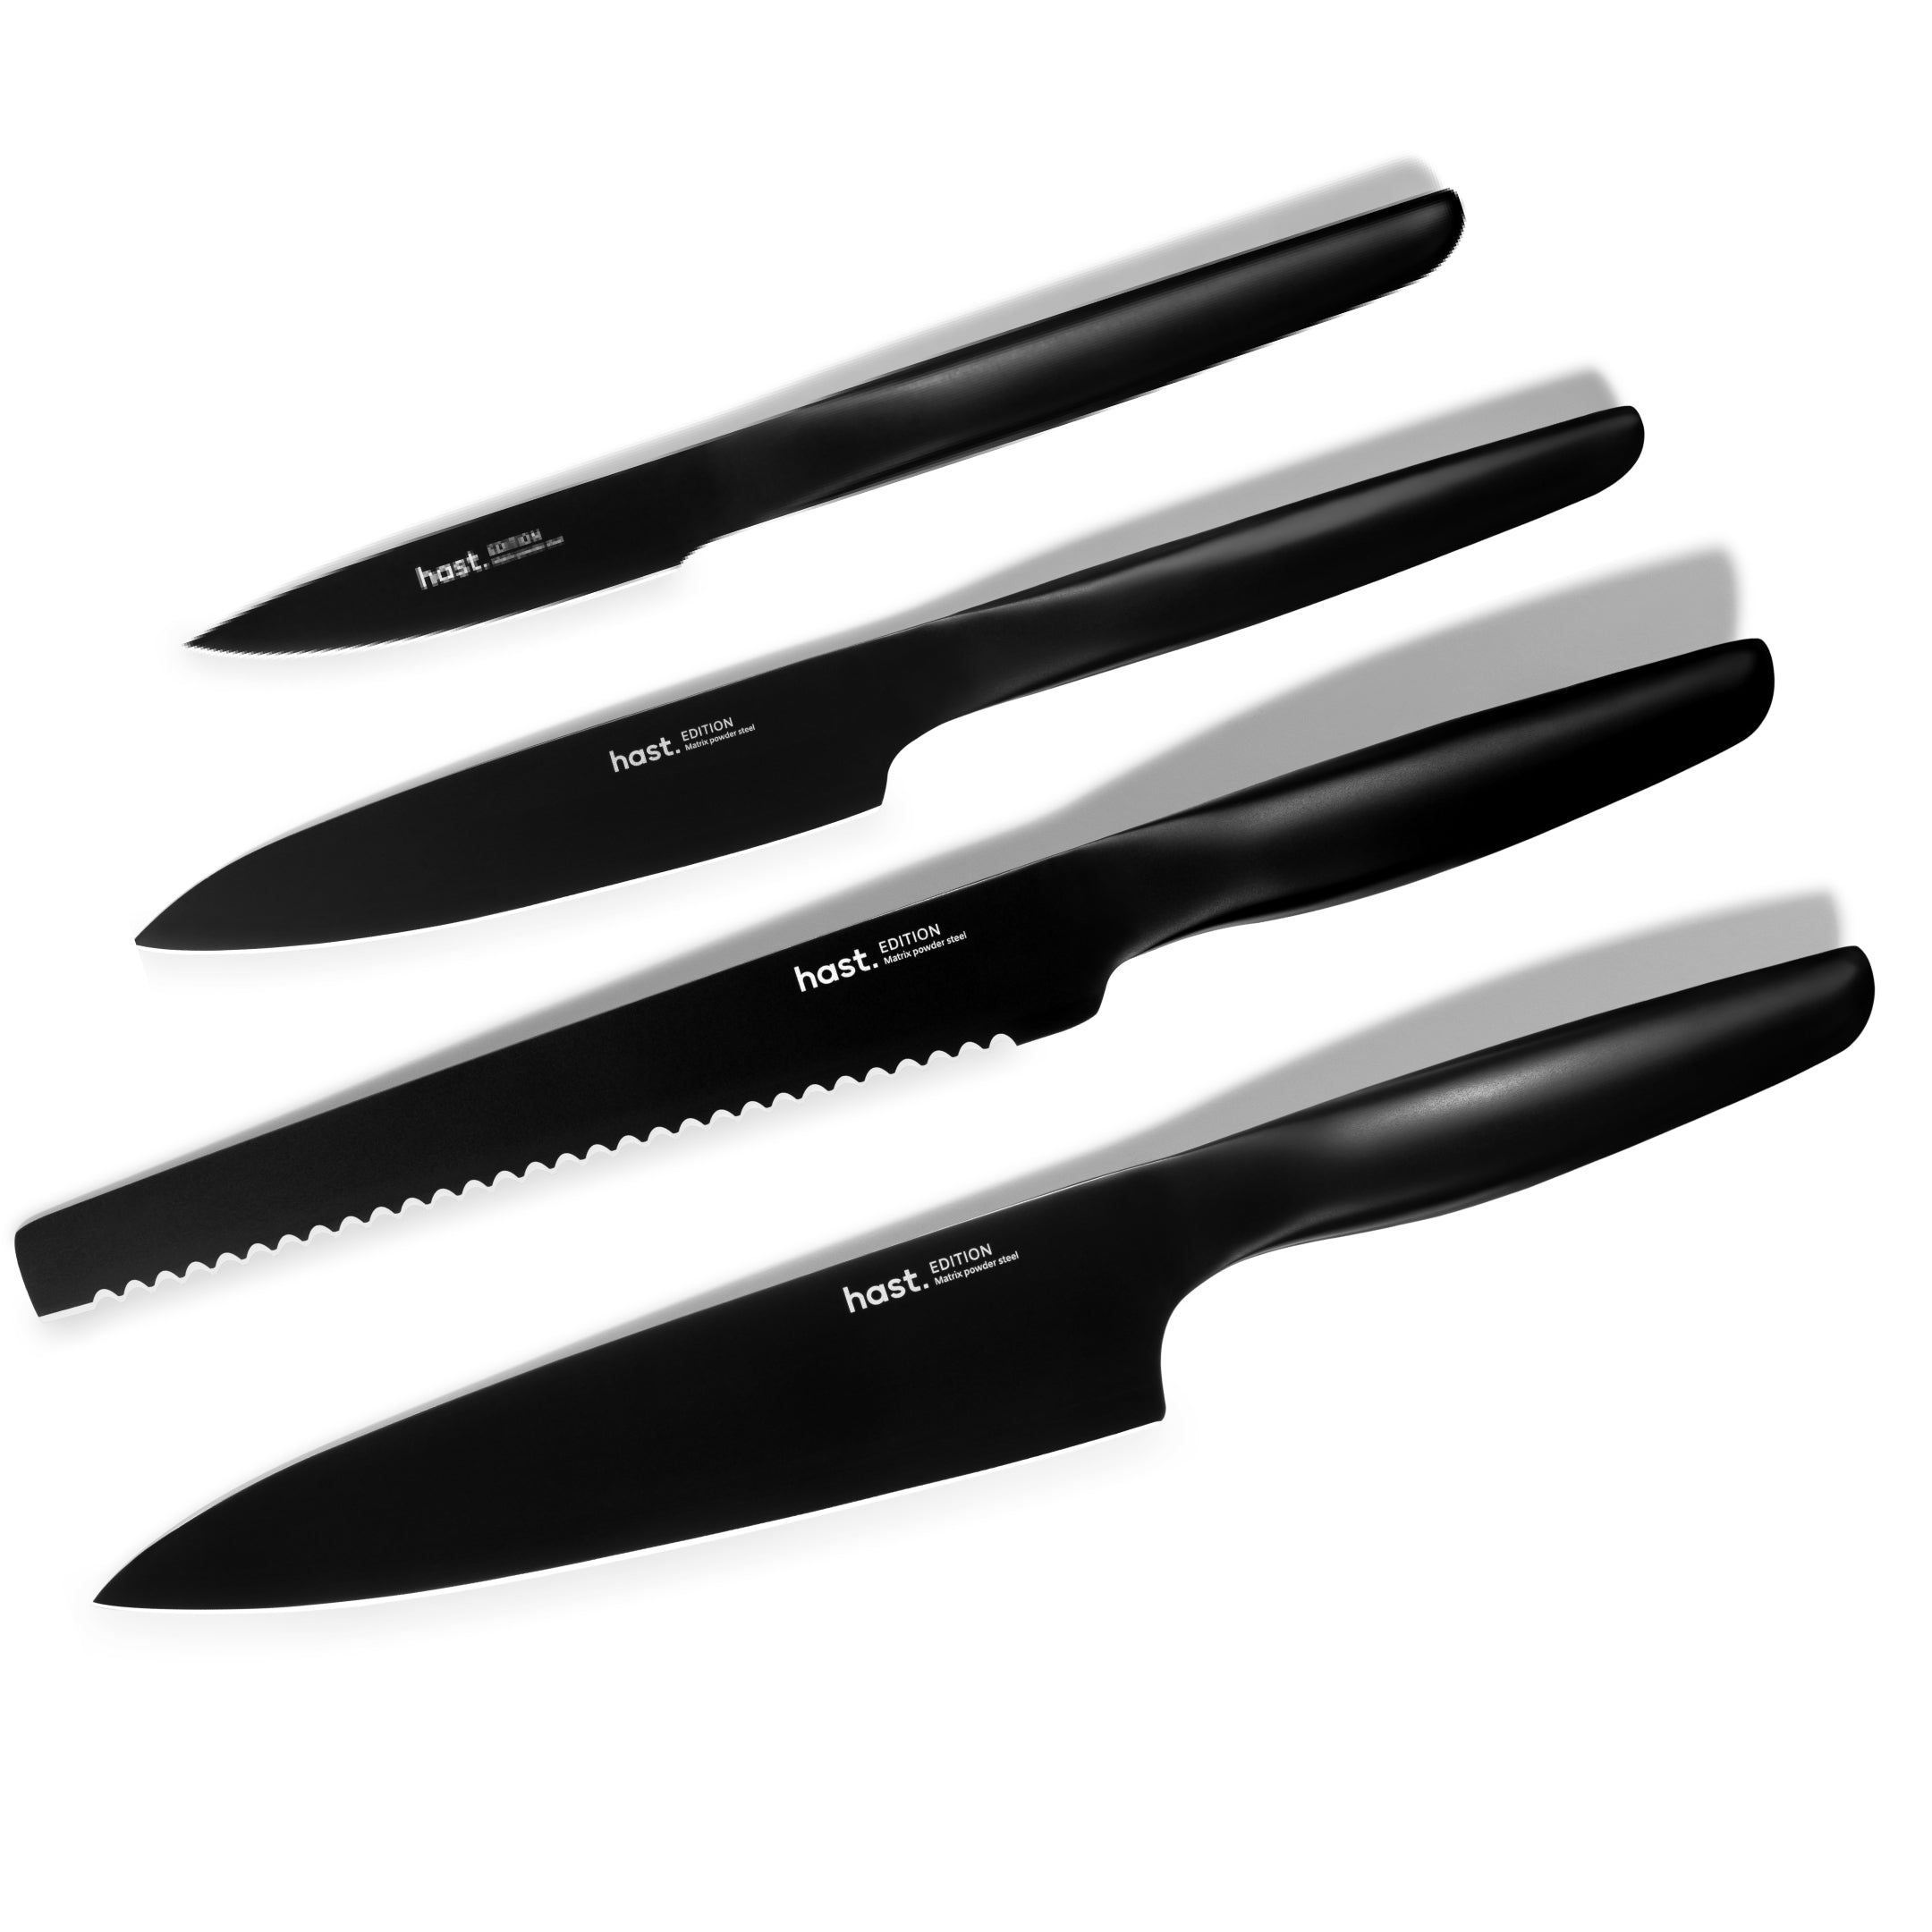 Hohenmoorer high-carbon Chef knife, 24 cm (9.4)